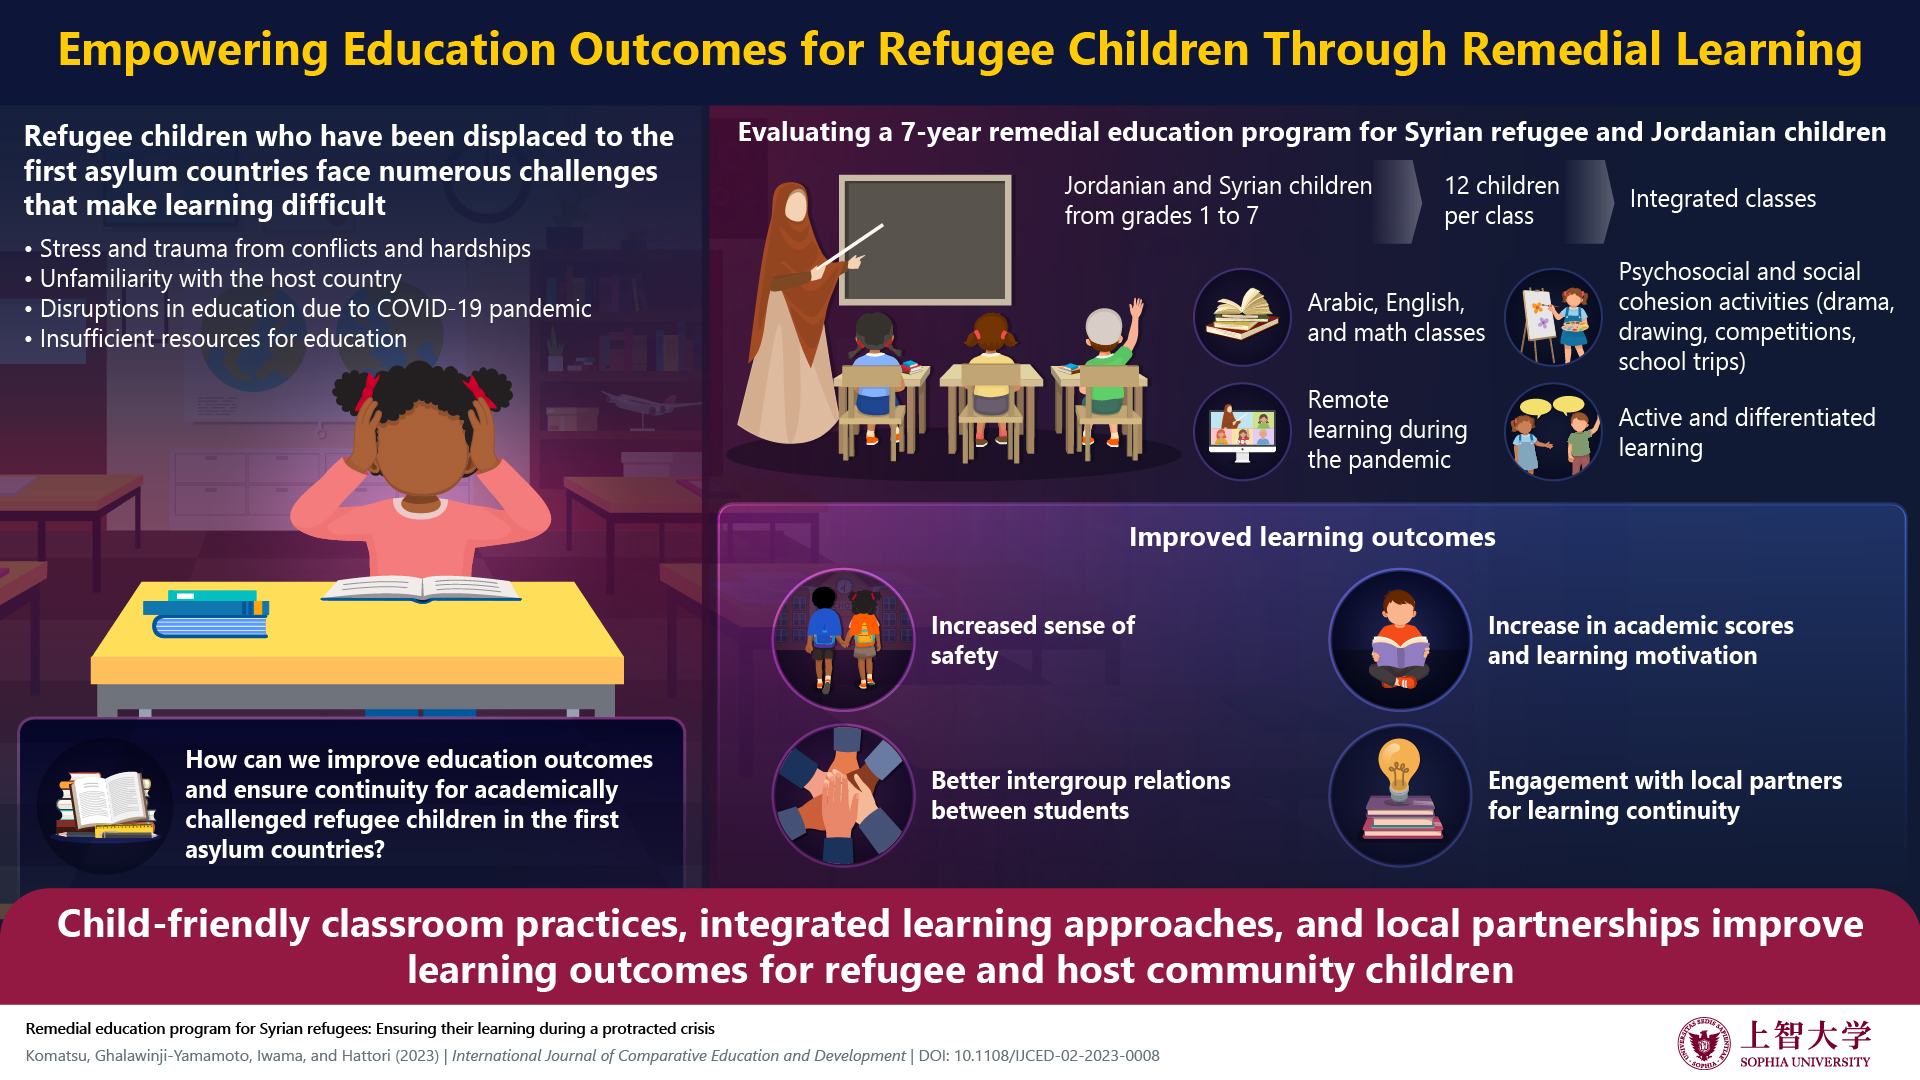 Improving Education and Human Security for Vulnerable Refugee Children